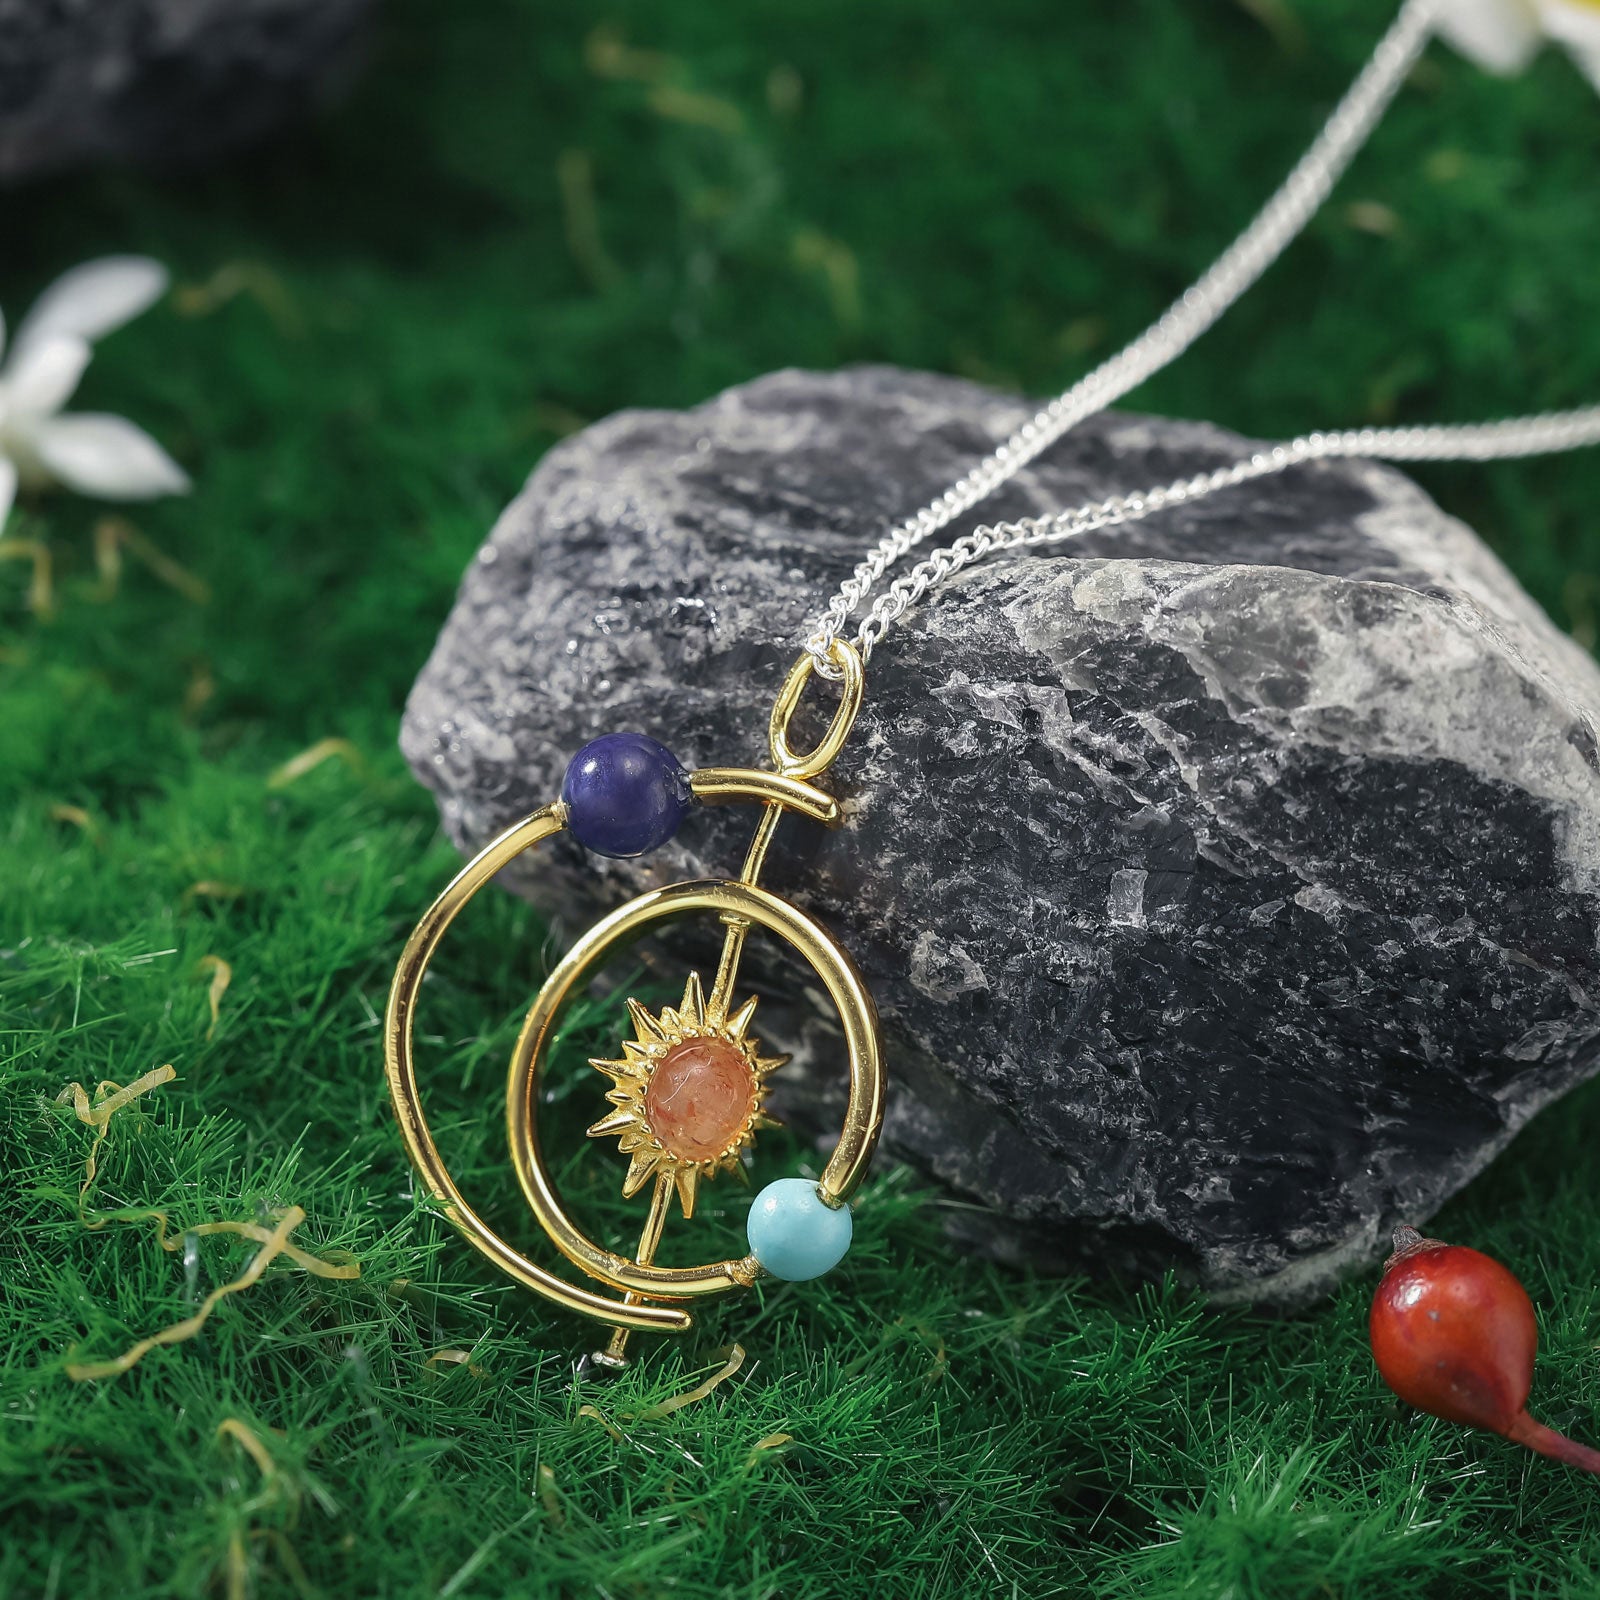 Gold Solar System Necklace